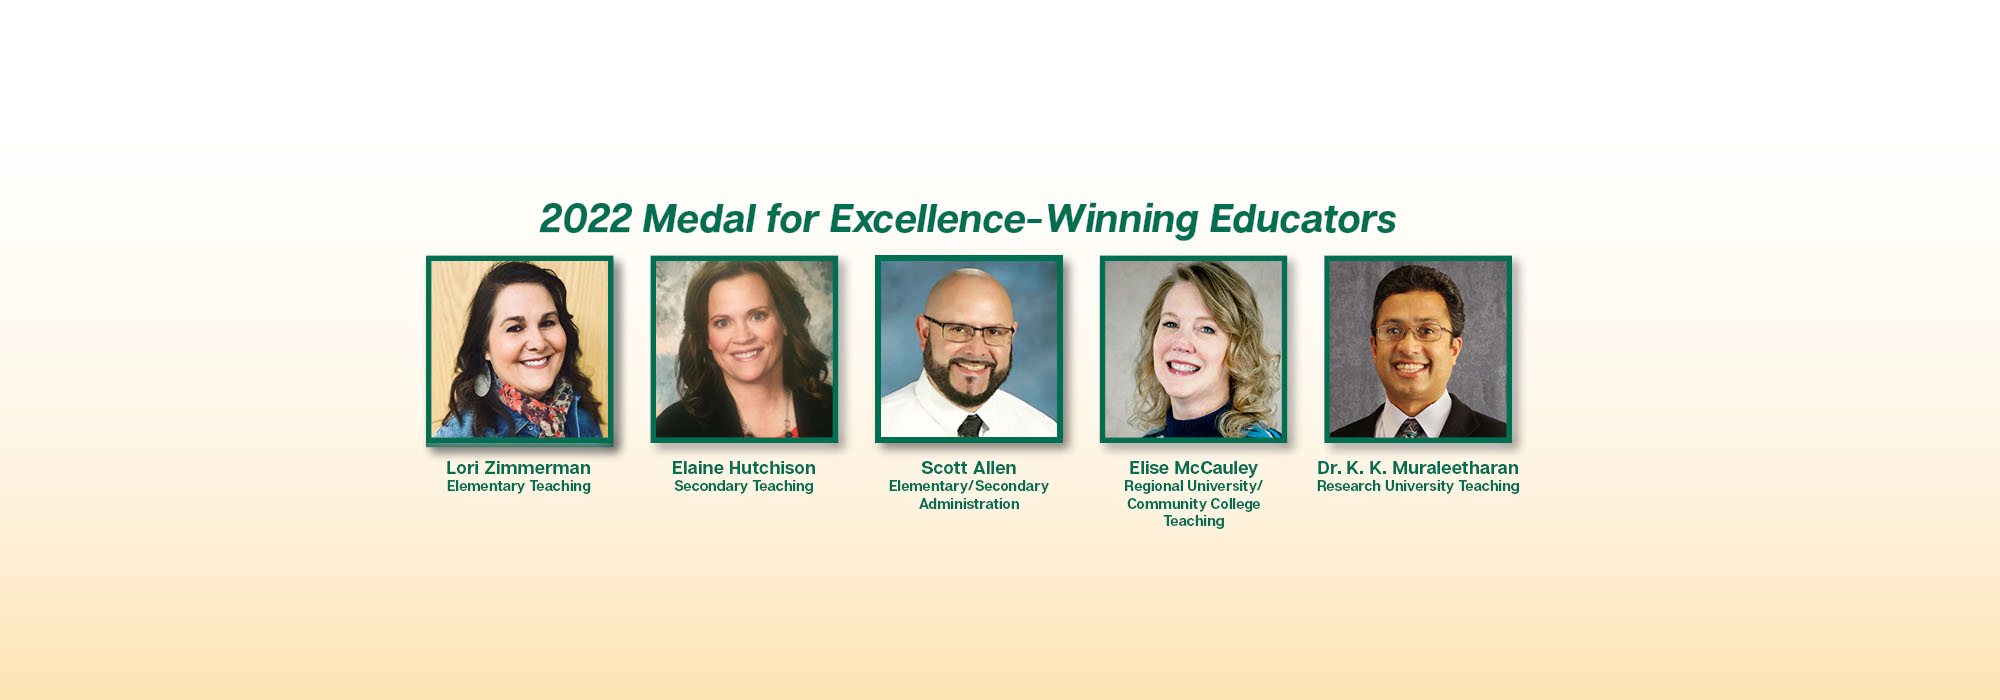 2022 Oklahoma Medal for Excellence-Winning Educators Announced